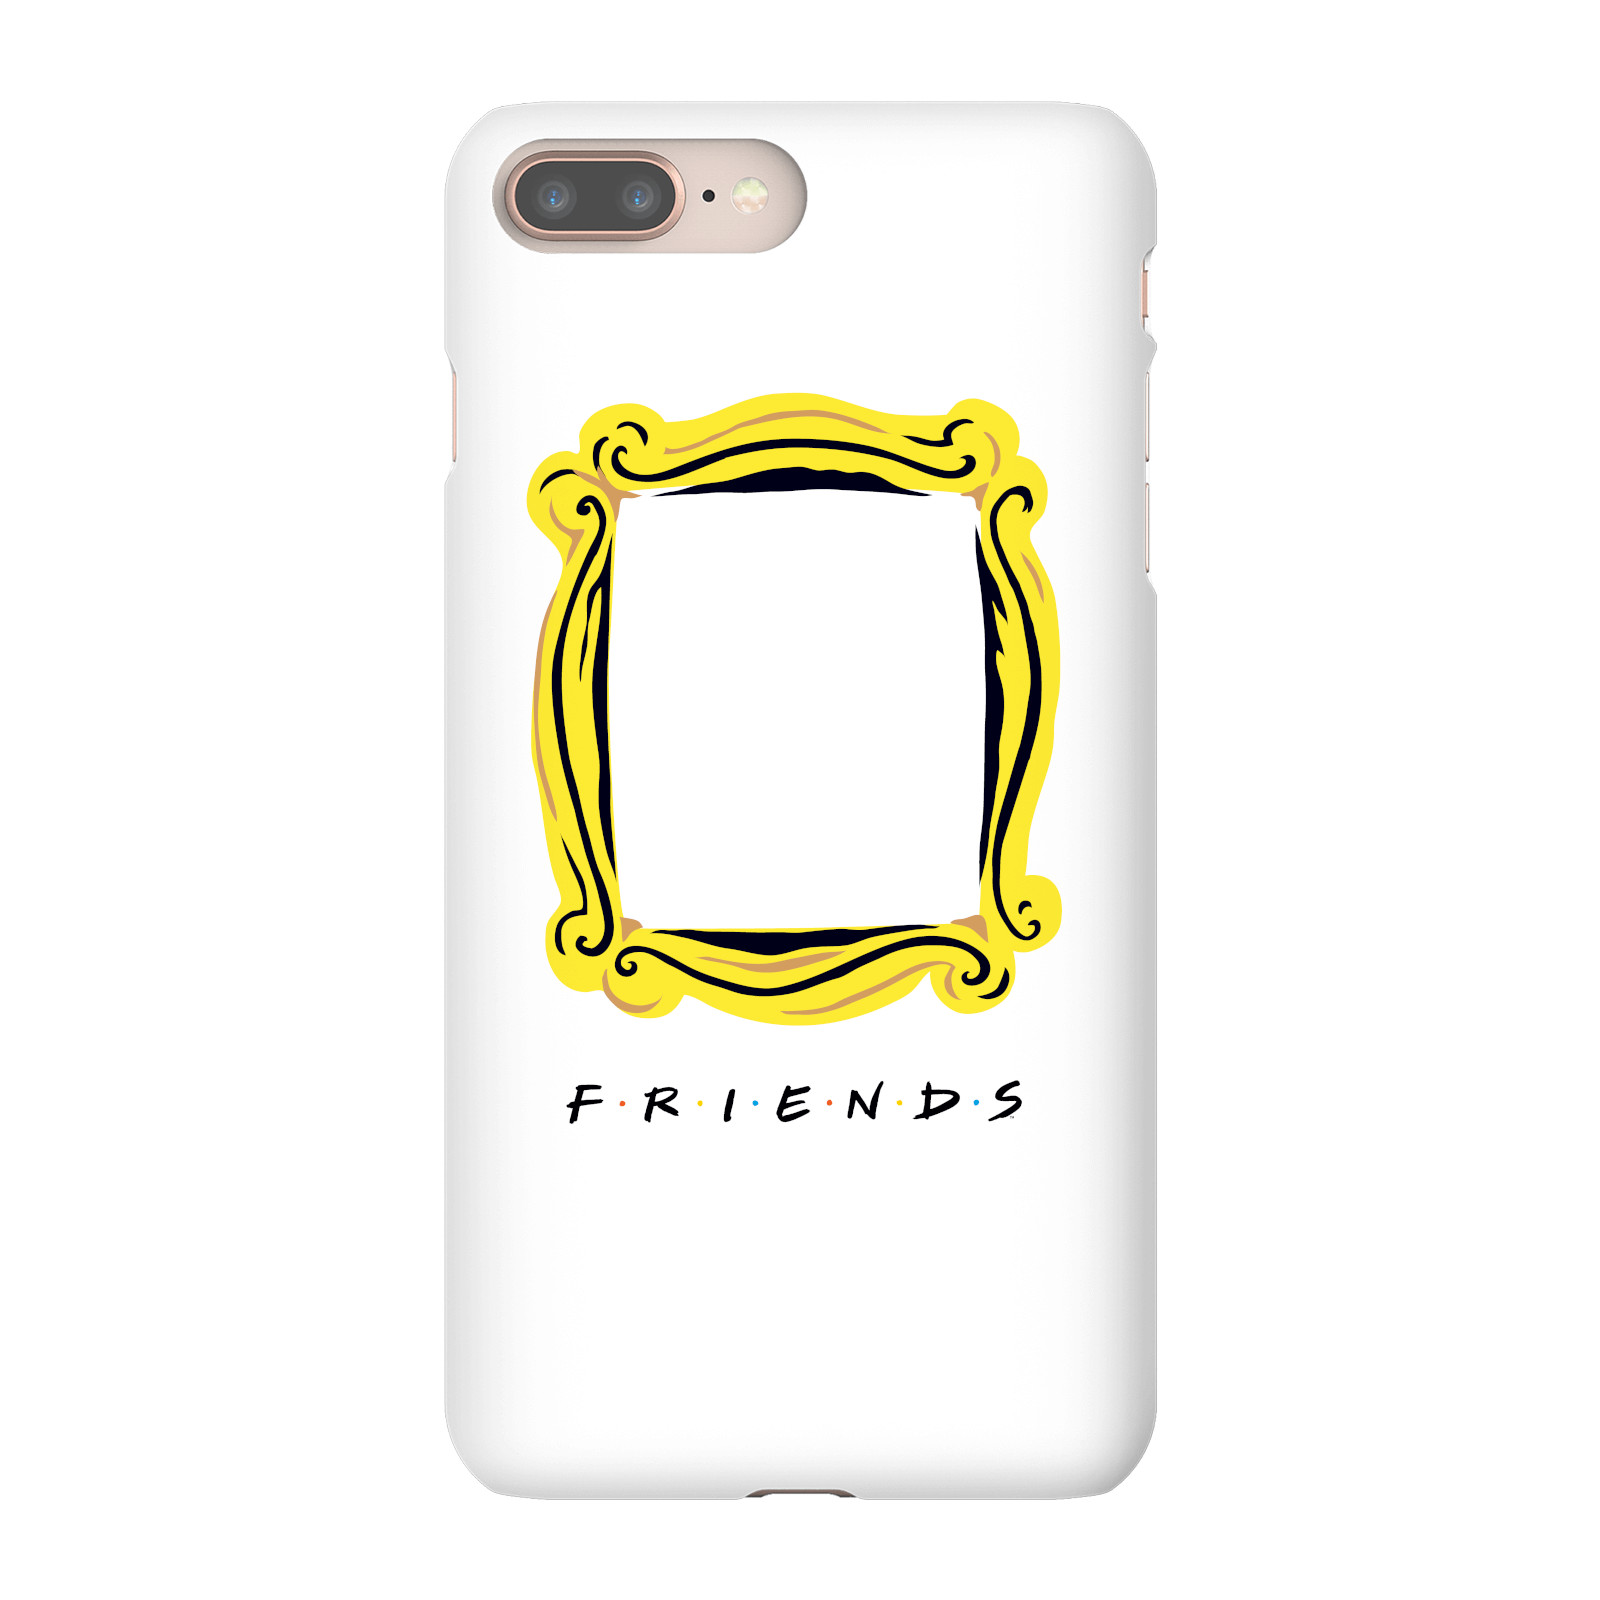 Photos - Case Frame Friends  Phone  for iPhone and Android - iPhone 6 - Tough   